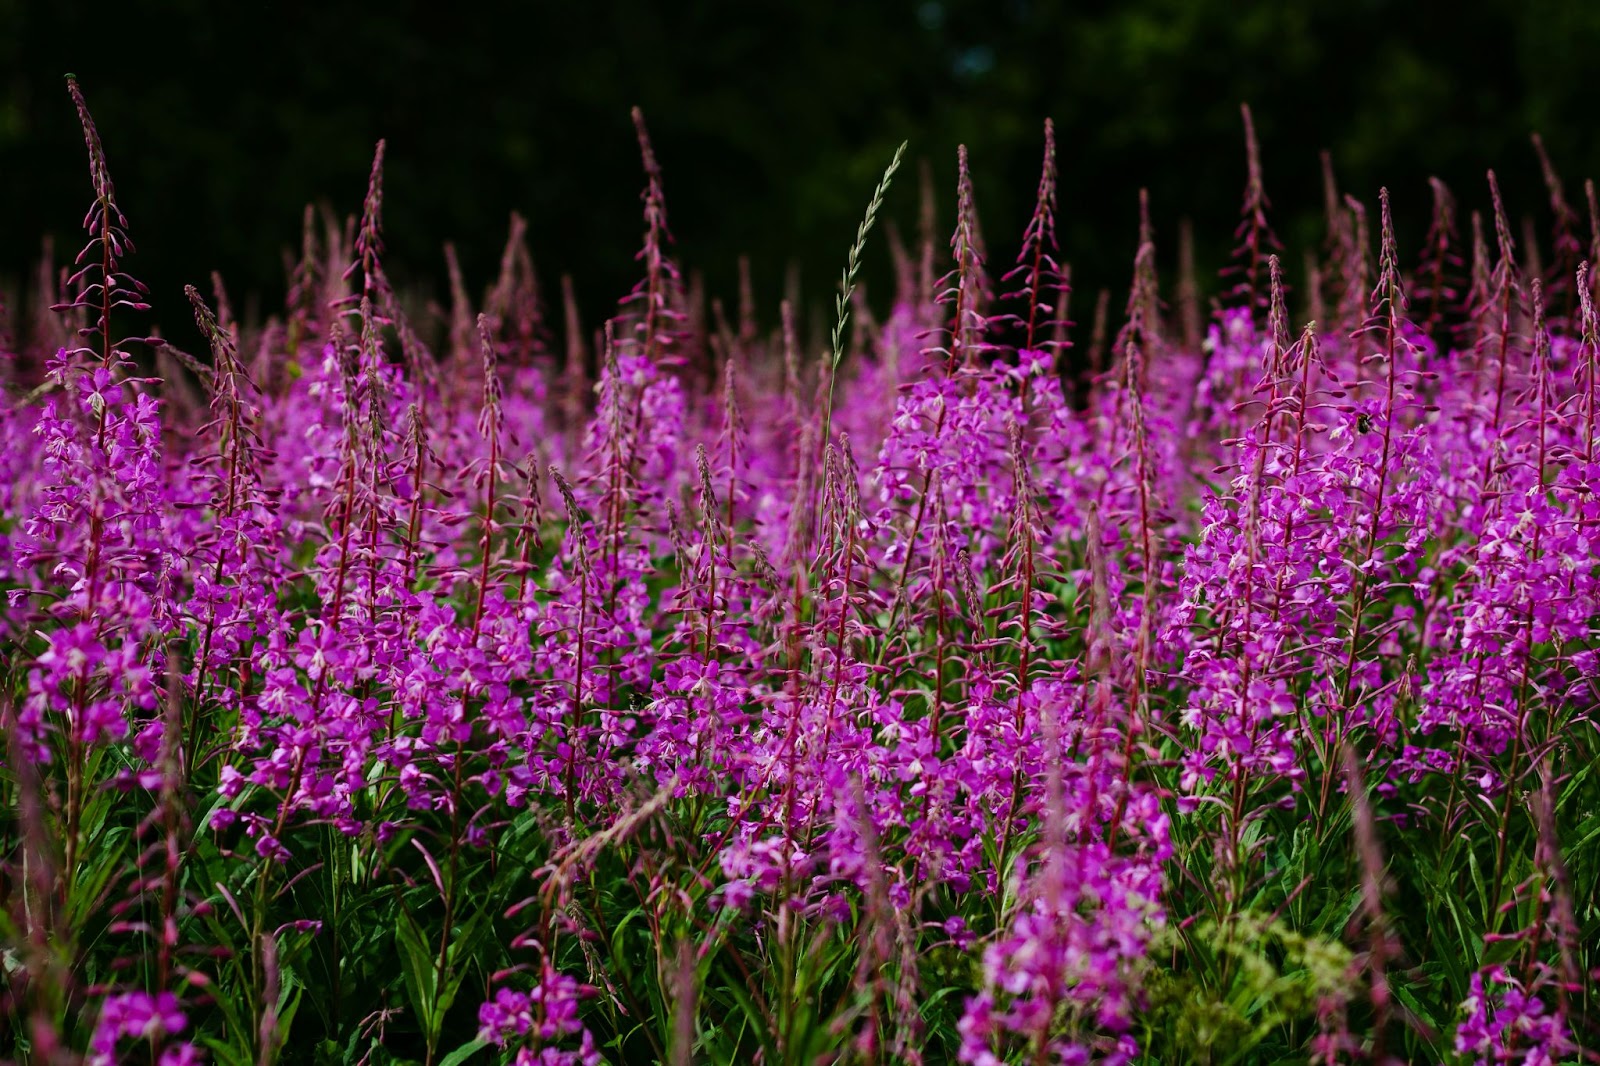 fireweed plant thriving in an area previously impacted by BC wildfires